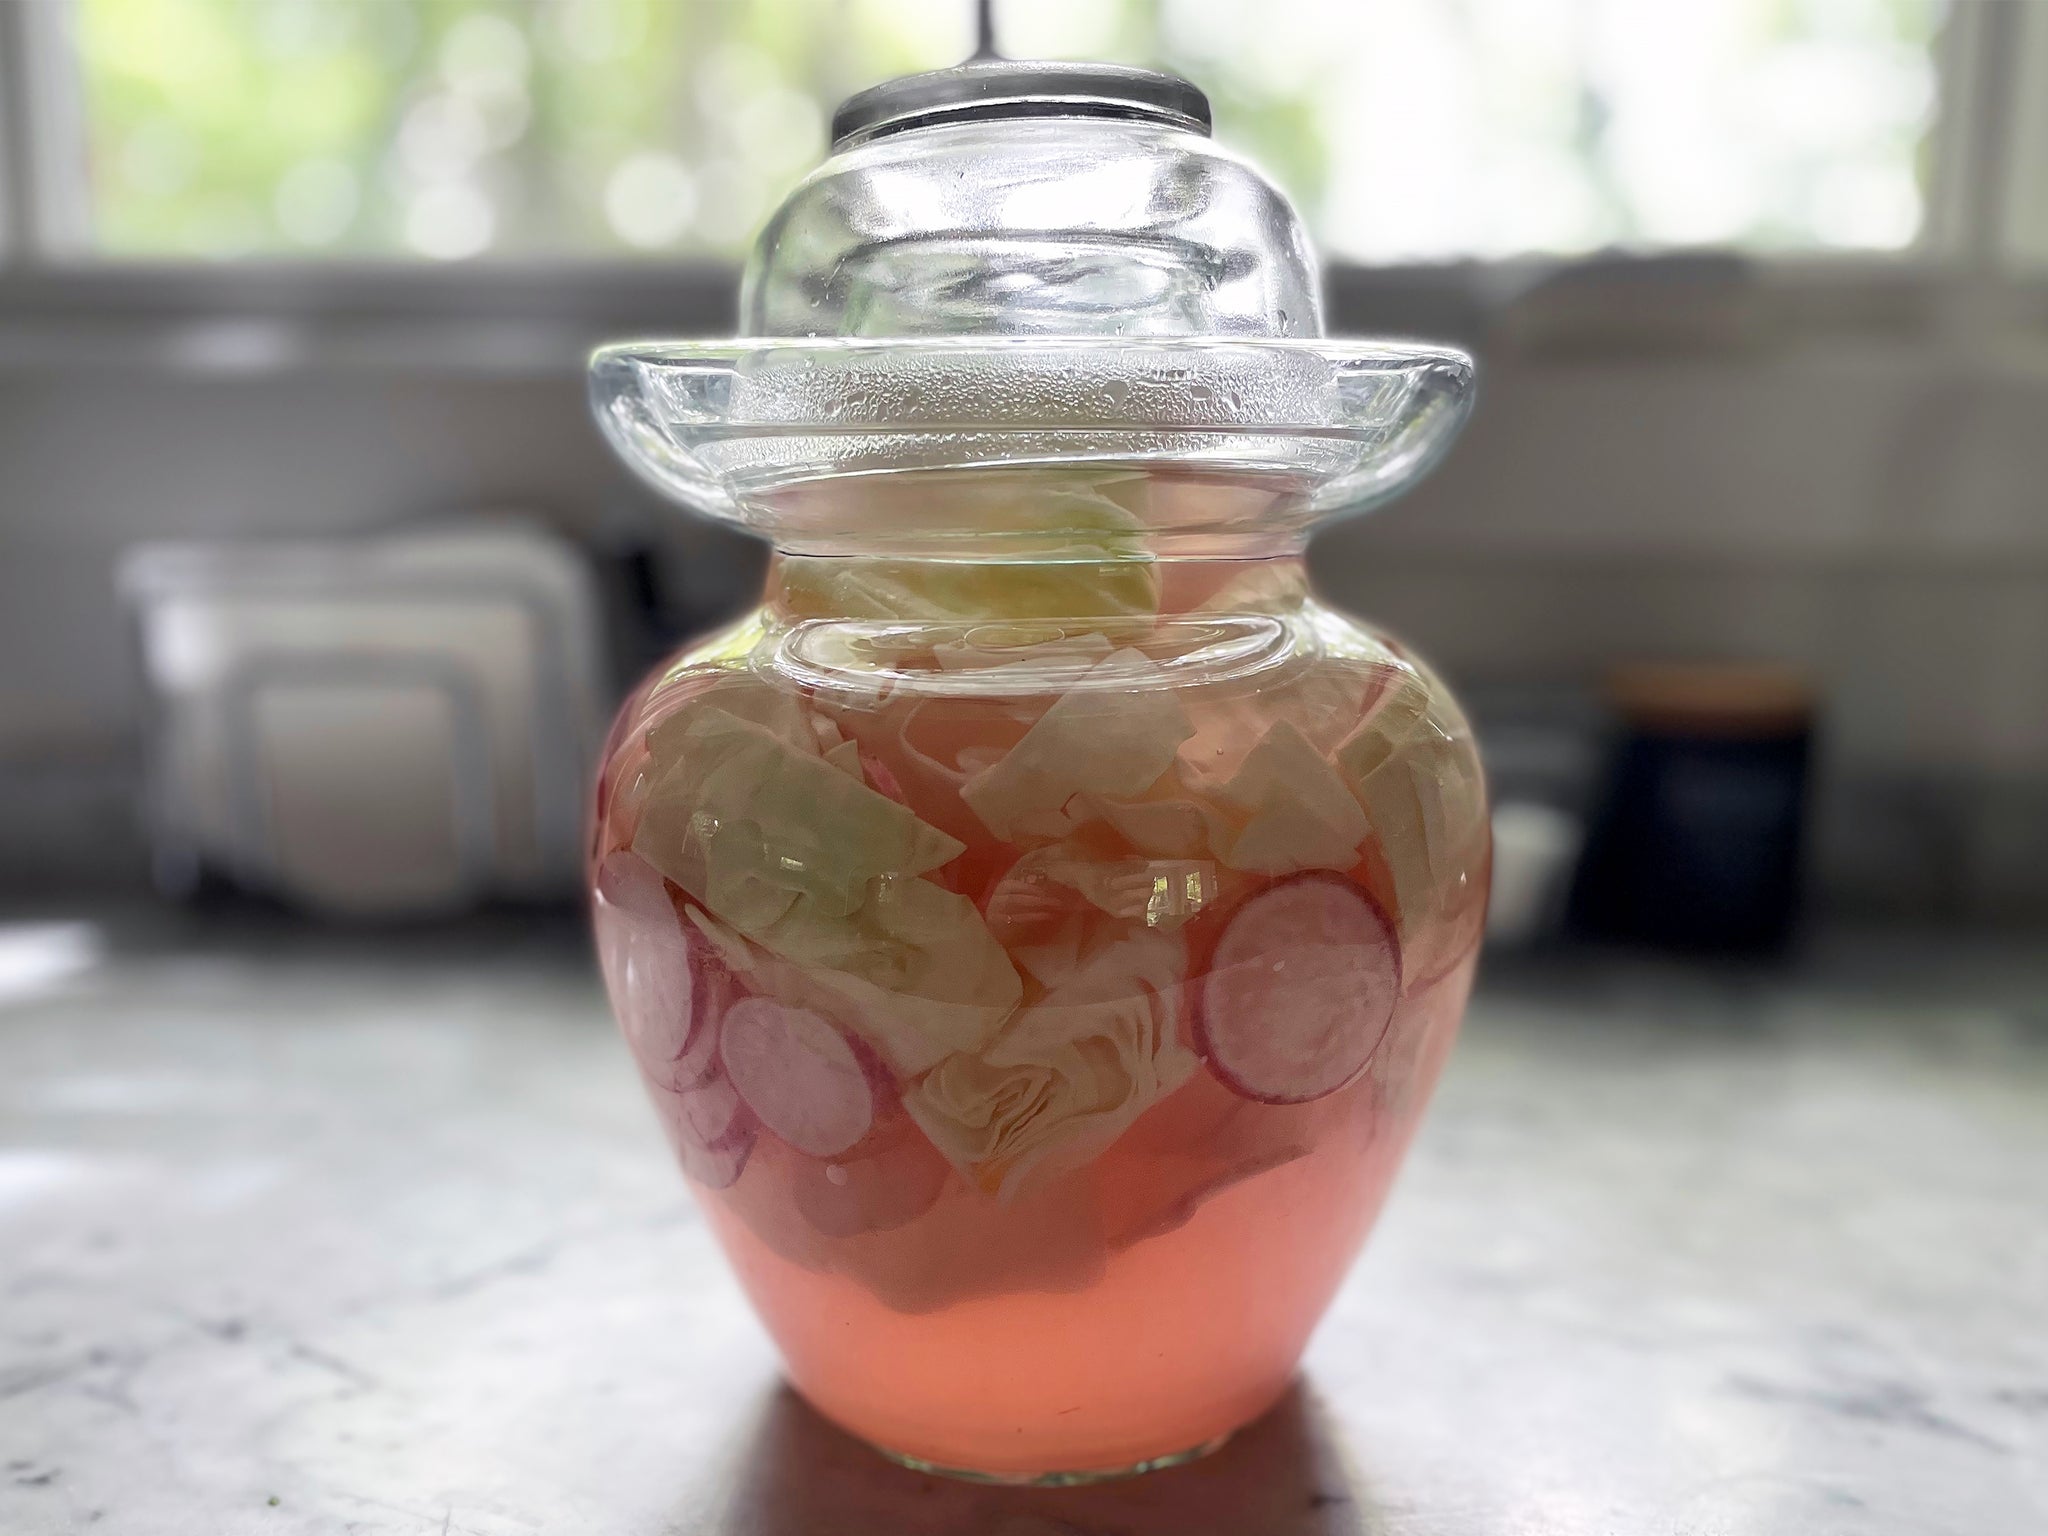 Sichuan Paocai Pickle Jar With Fermented Cabbage and Radish